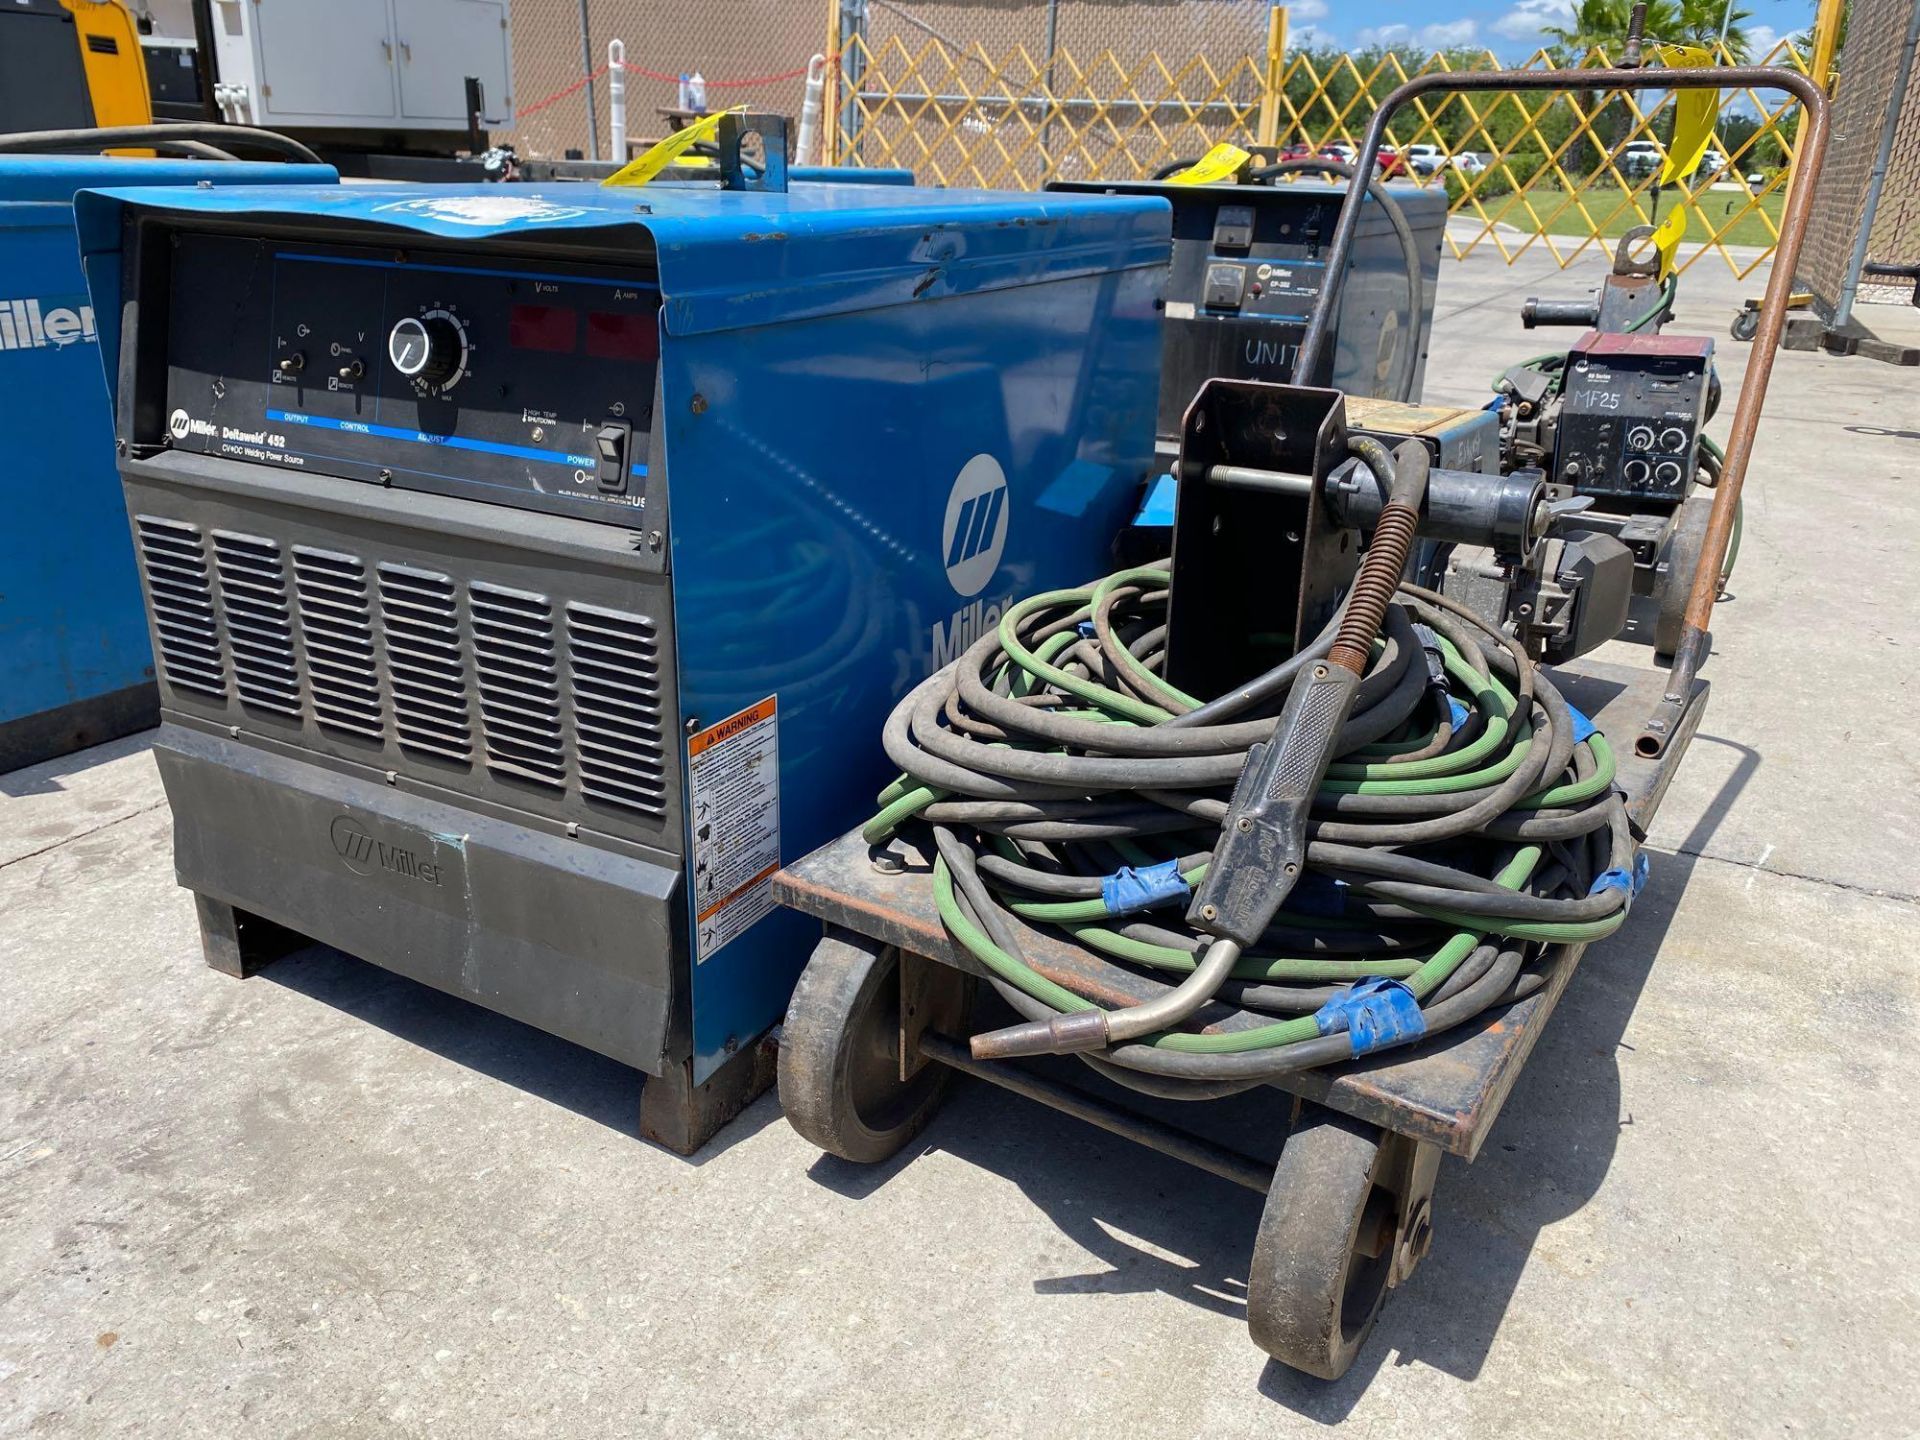 MILLER DELTAWELD 452 ELECTRIC WELDER WITH MILLER 60 SERIES 24V WIRE FEEDER AND CABLES/CORDS - Image 2 of 10